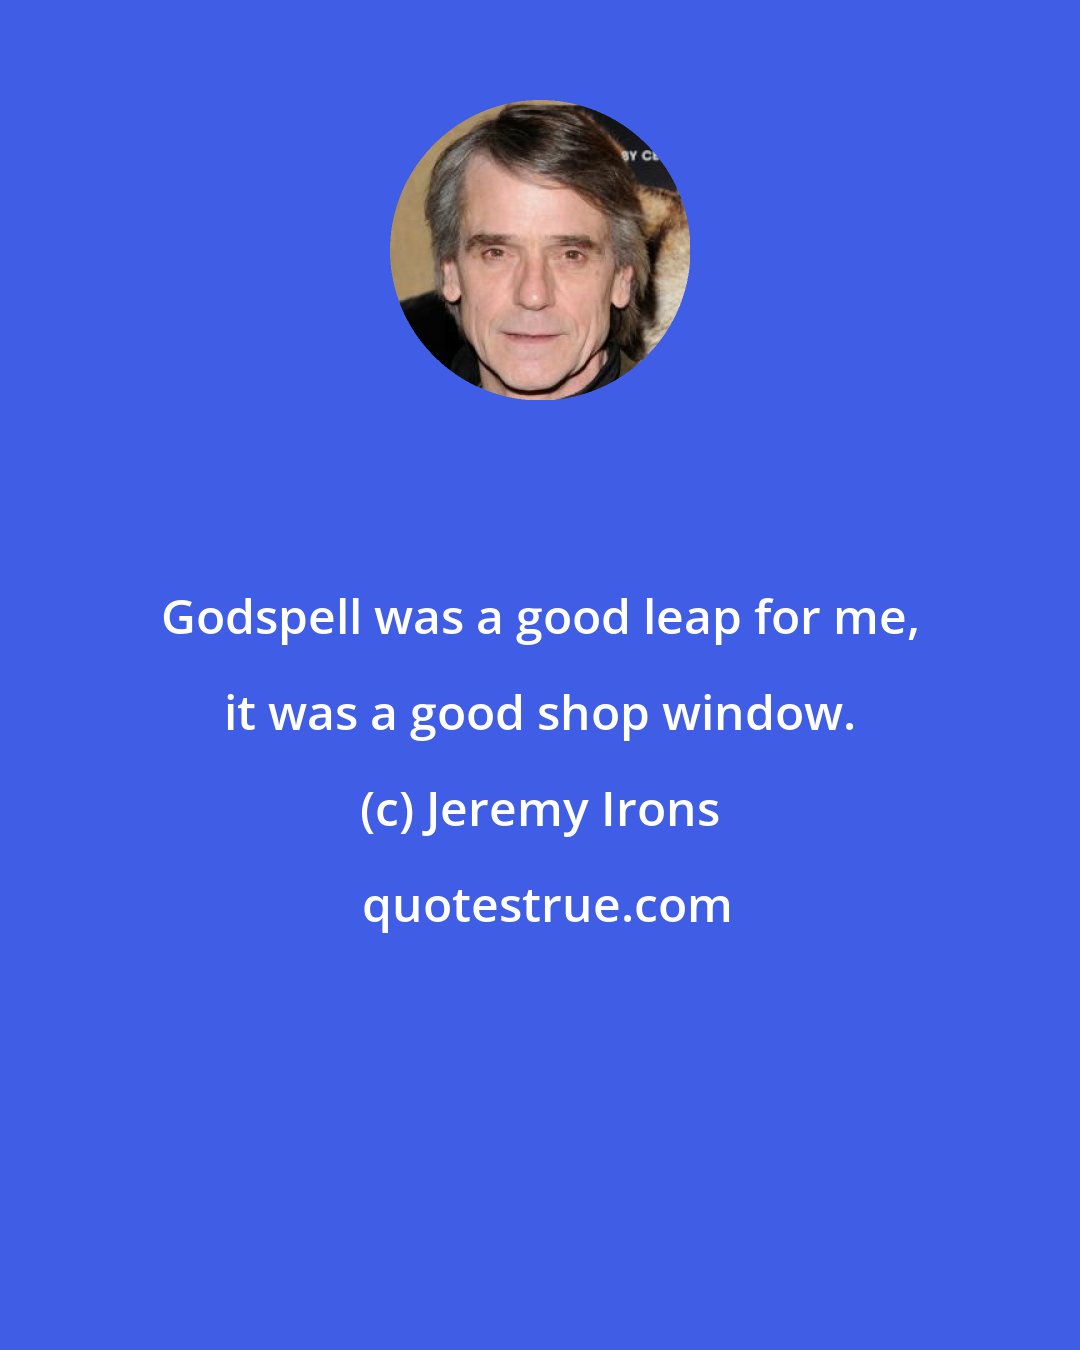 Jeremy Irons: Godspell was a good leap for me, it was a good shop window.